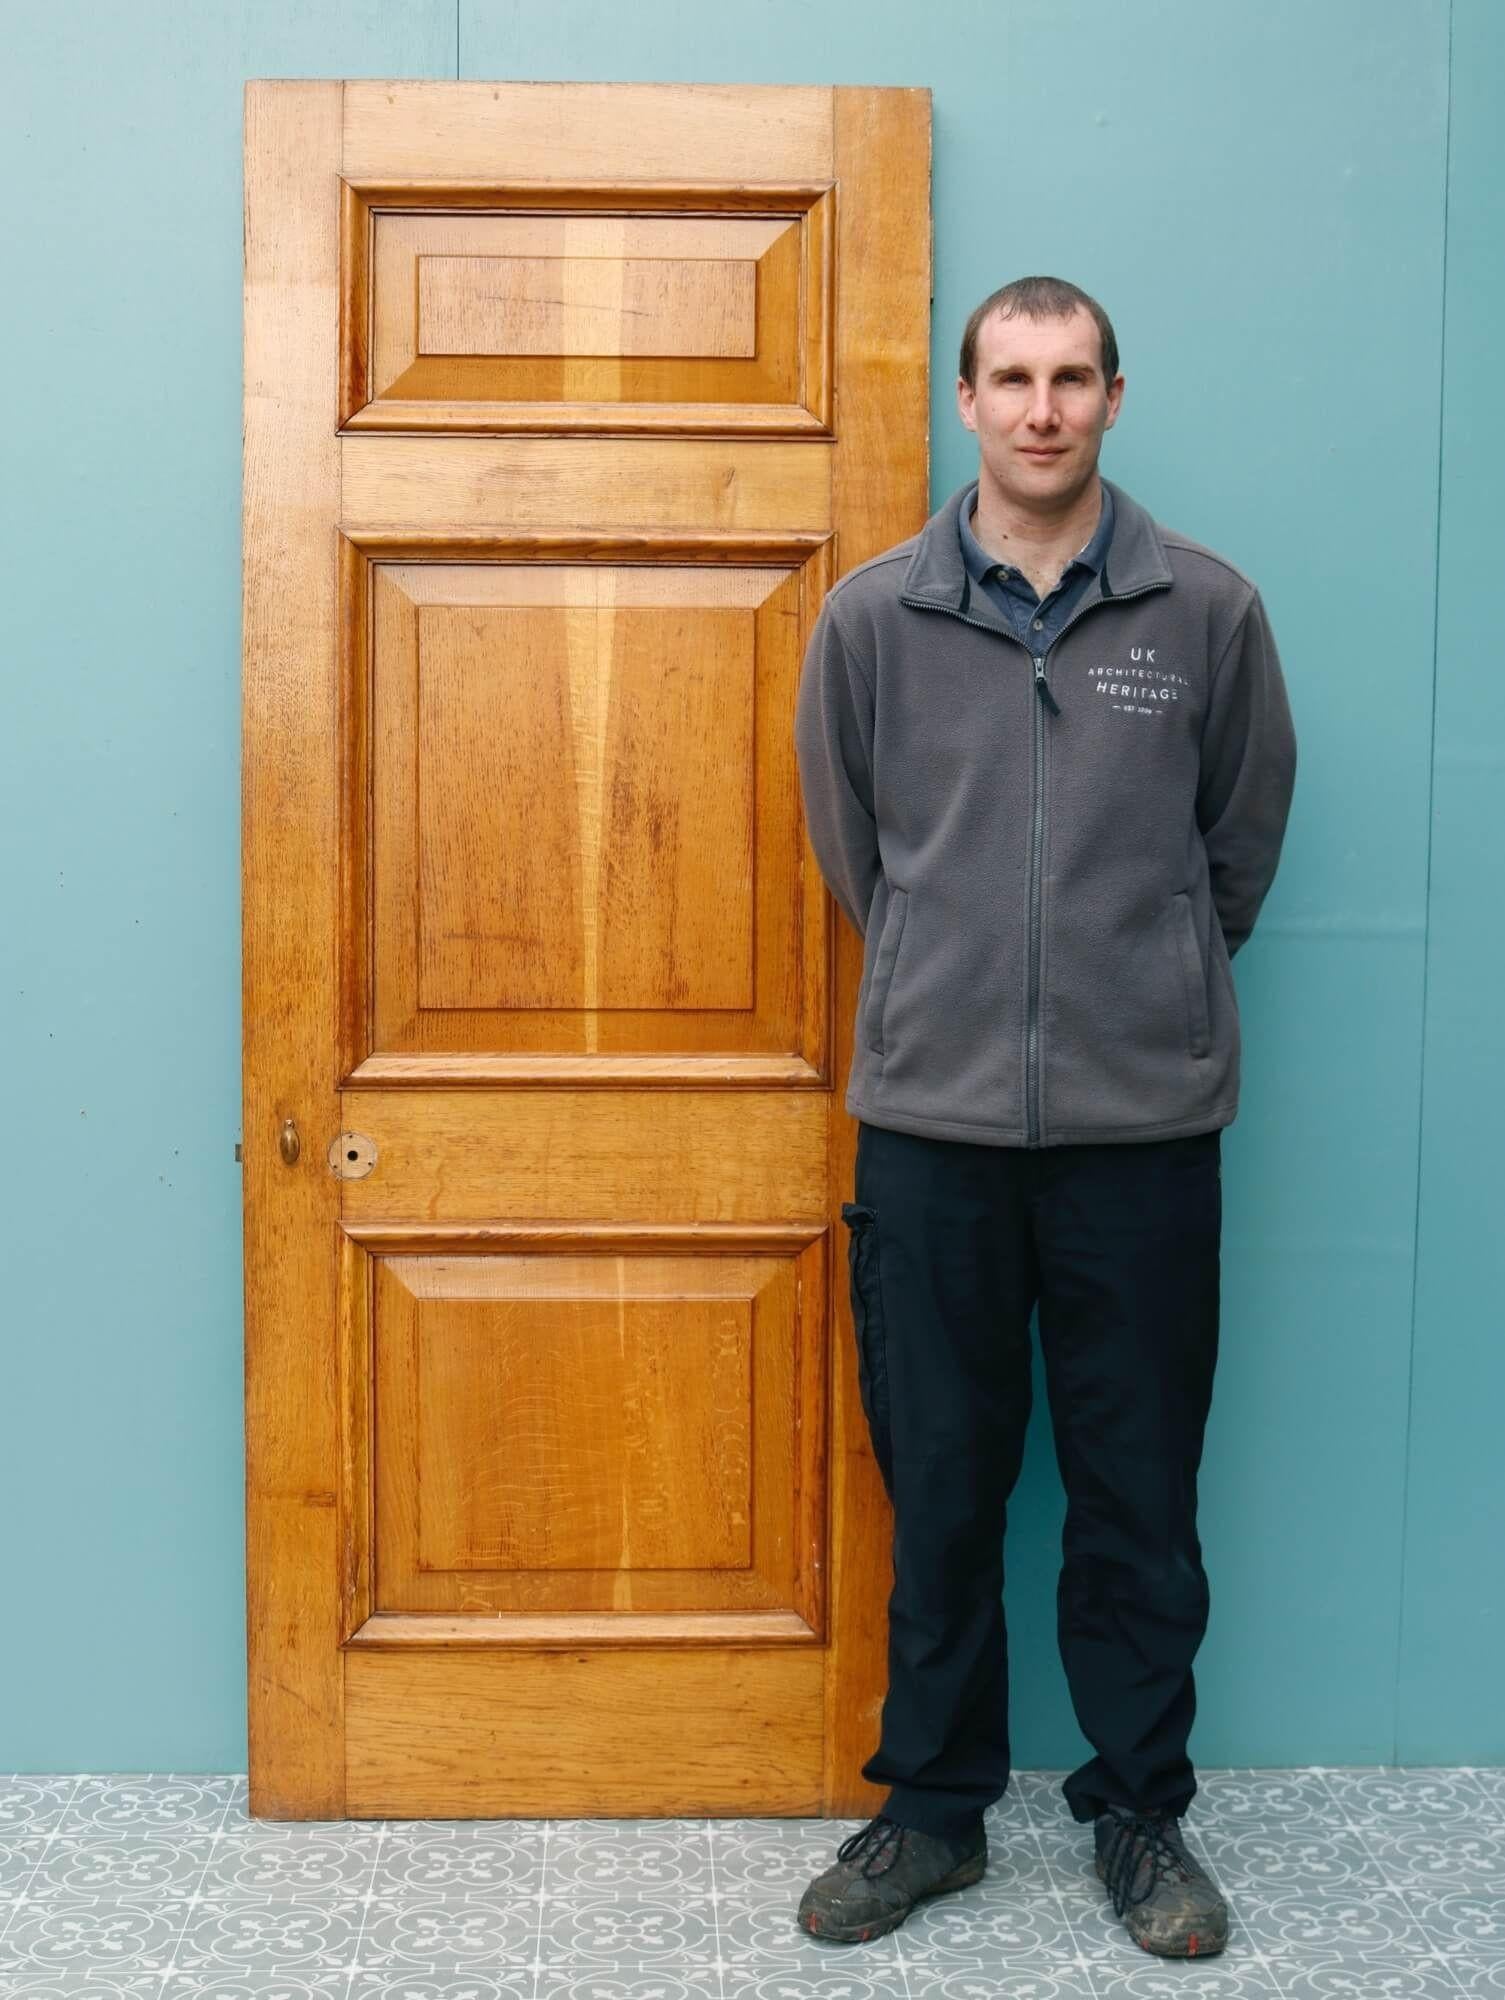 A strong and substantial reclaimed 1920s oak door suitable for interior or exterior use. This sturdy antique oak door includes an original frame and architrave for both sides (pictured), all smartly finished with varnish that enhances the beautiful